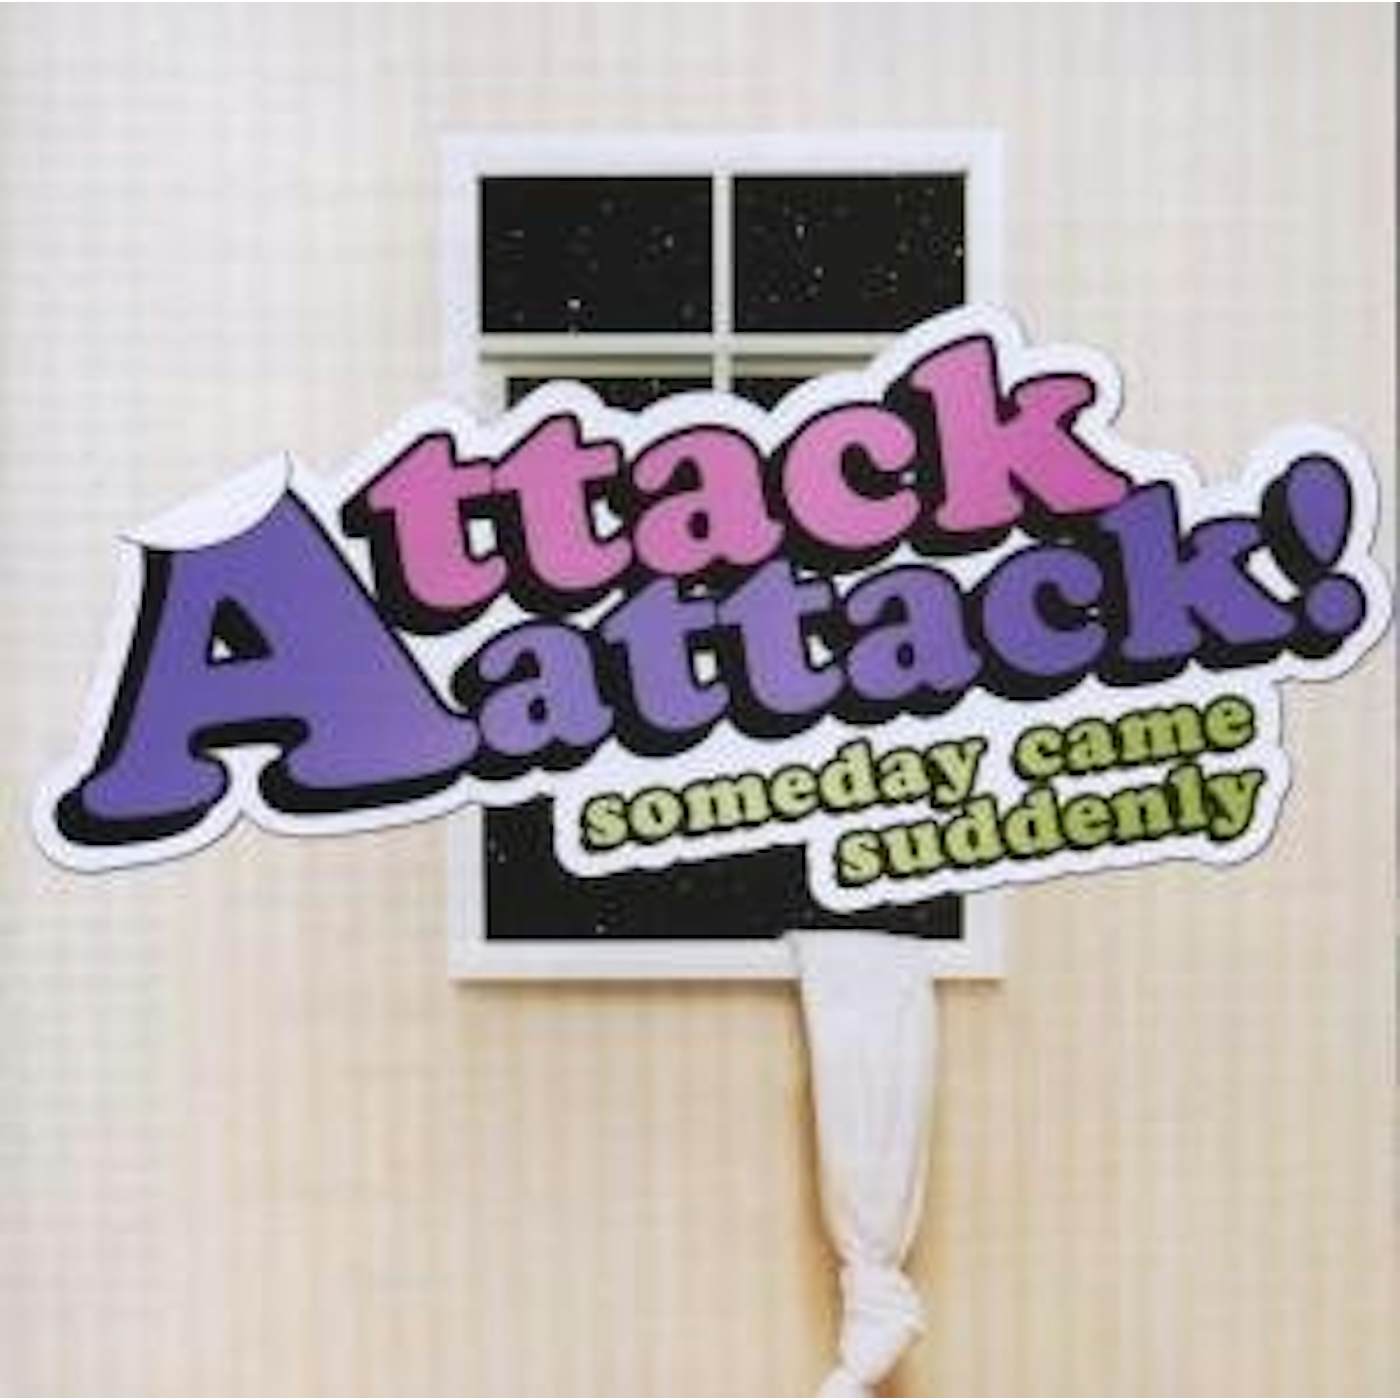 Attack Attack! SOMEDAY CAME SUDDENLY CD